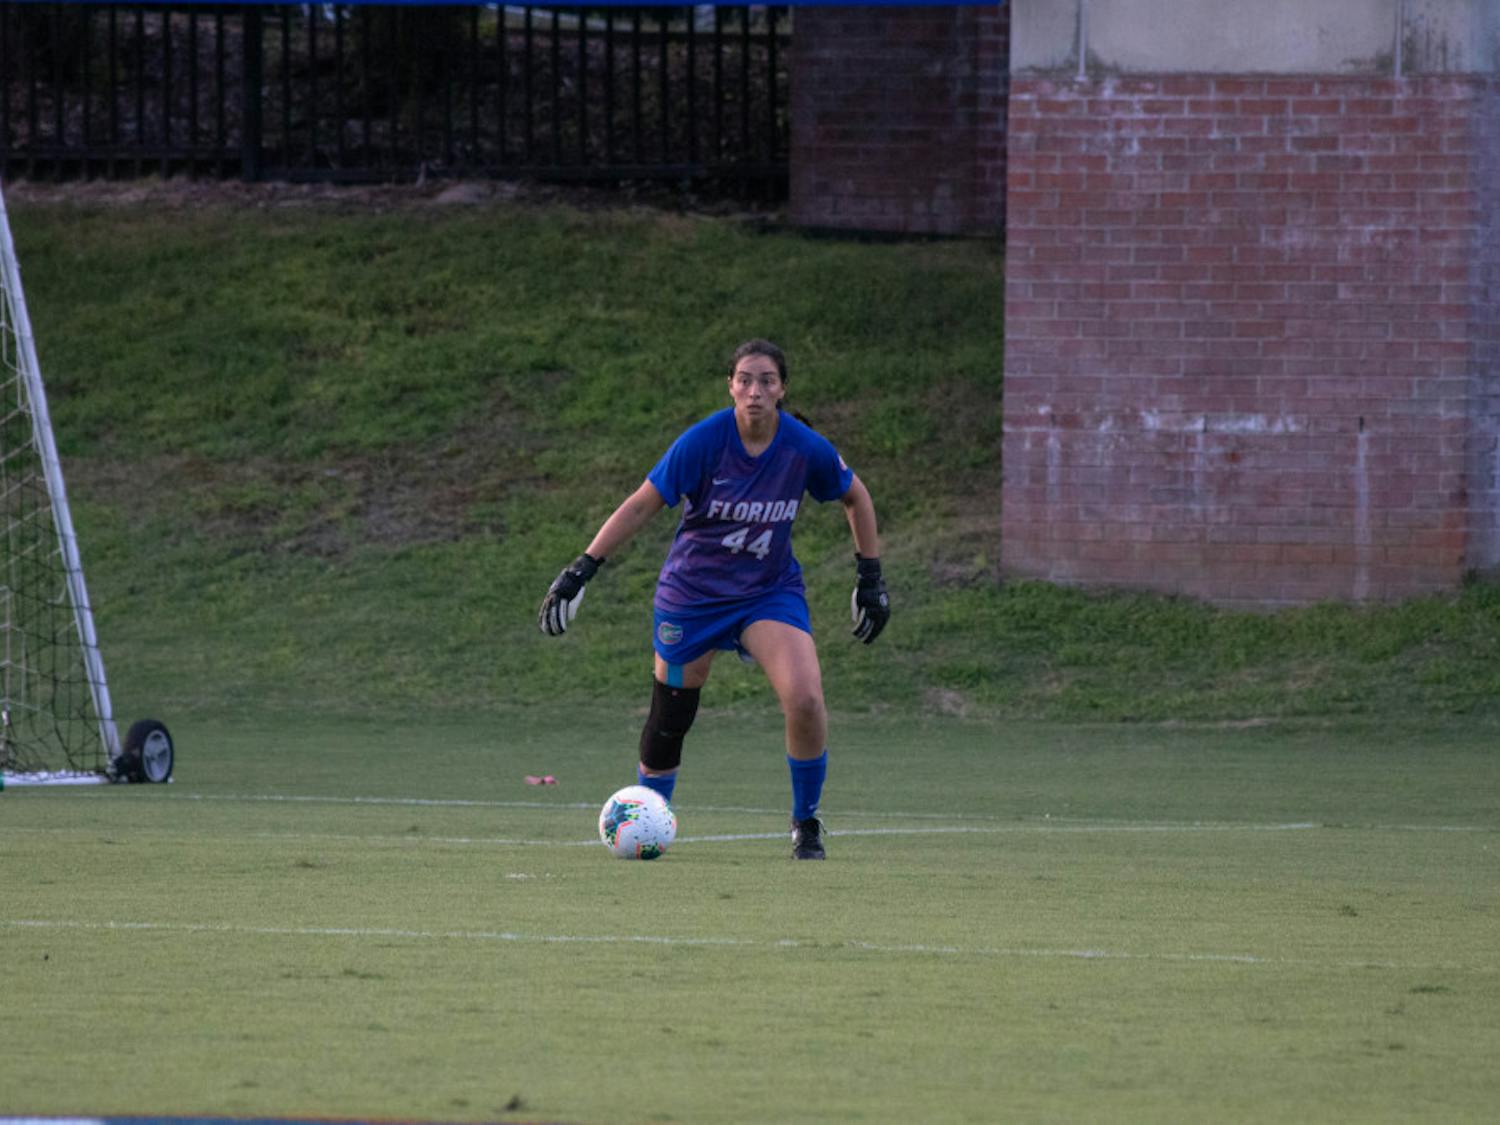 Florida goalie Susi Espinoza has only allowed 14 goals in 12 games this season. She currently averages 1.16 goals against per game and carries an 8-4 record.